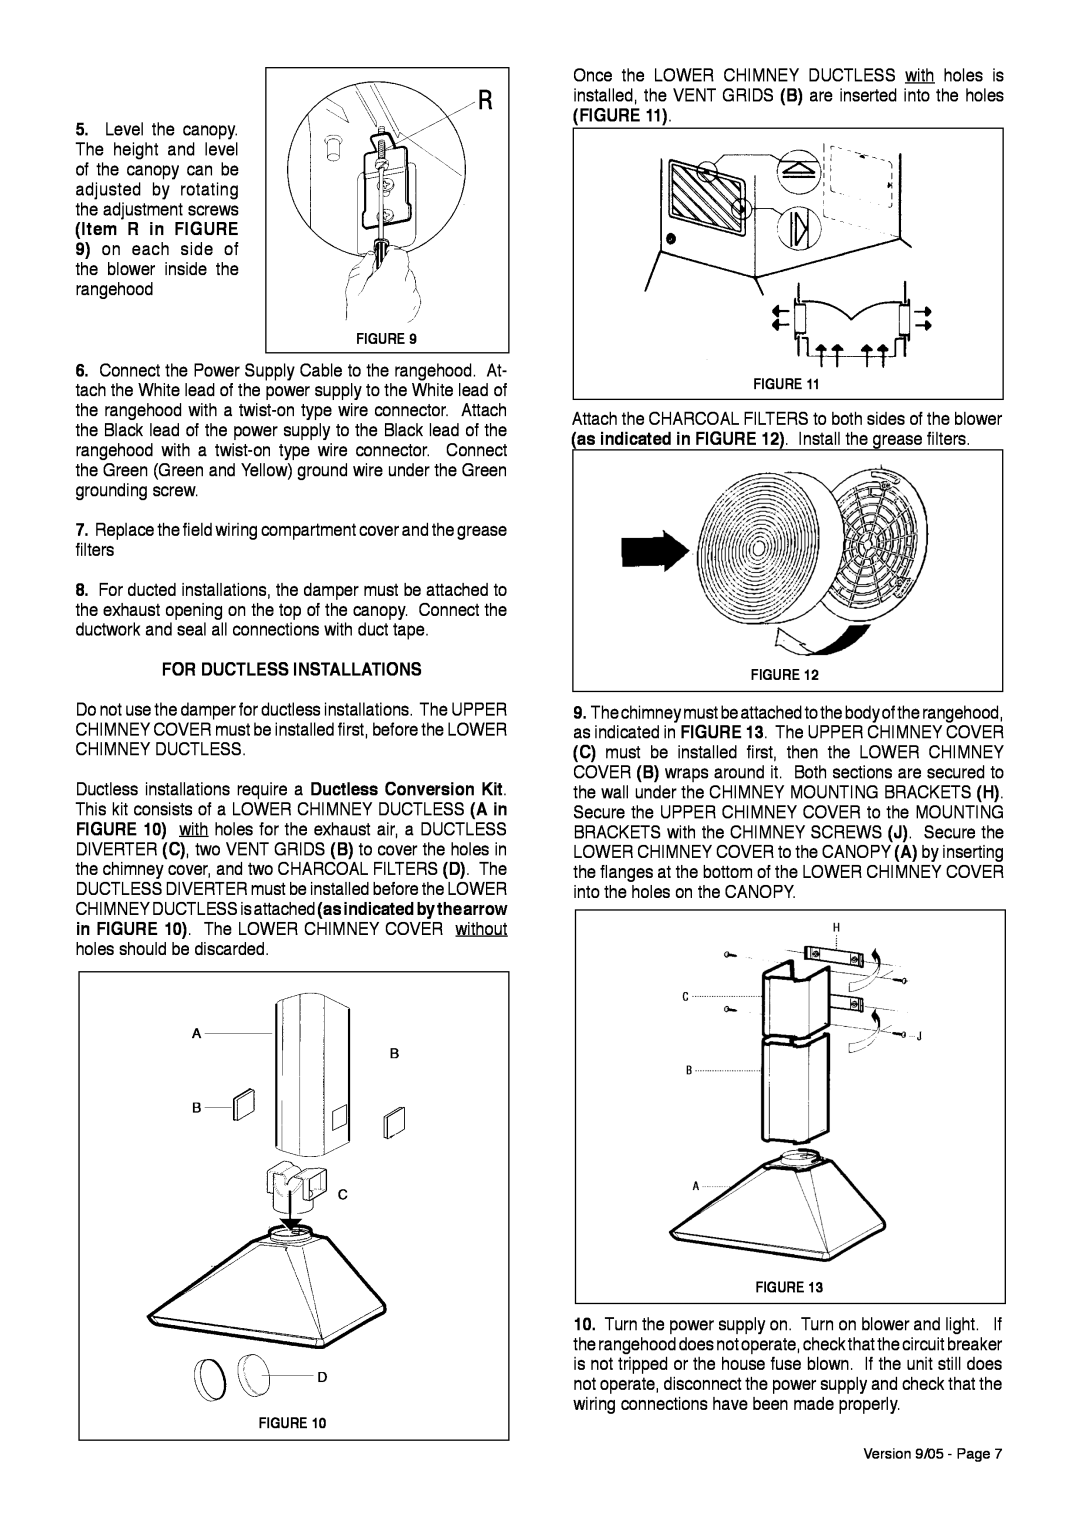 Faber Perla installation instructions For Ductless Installations 